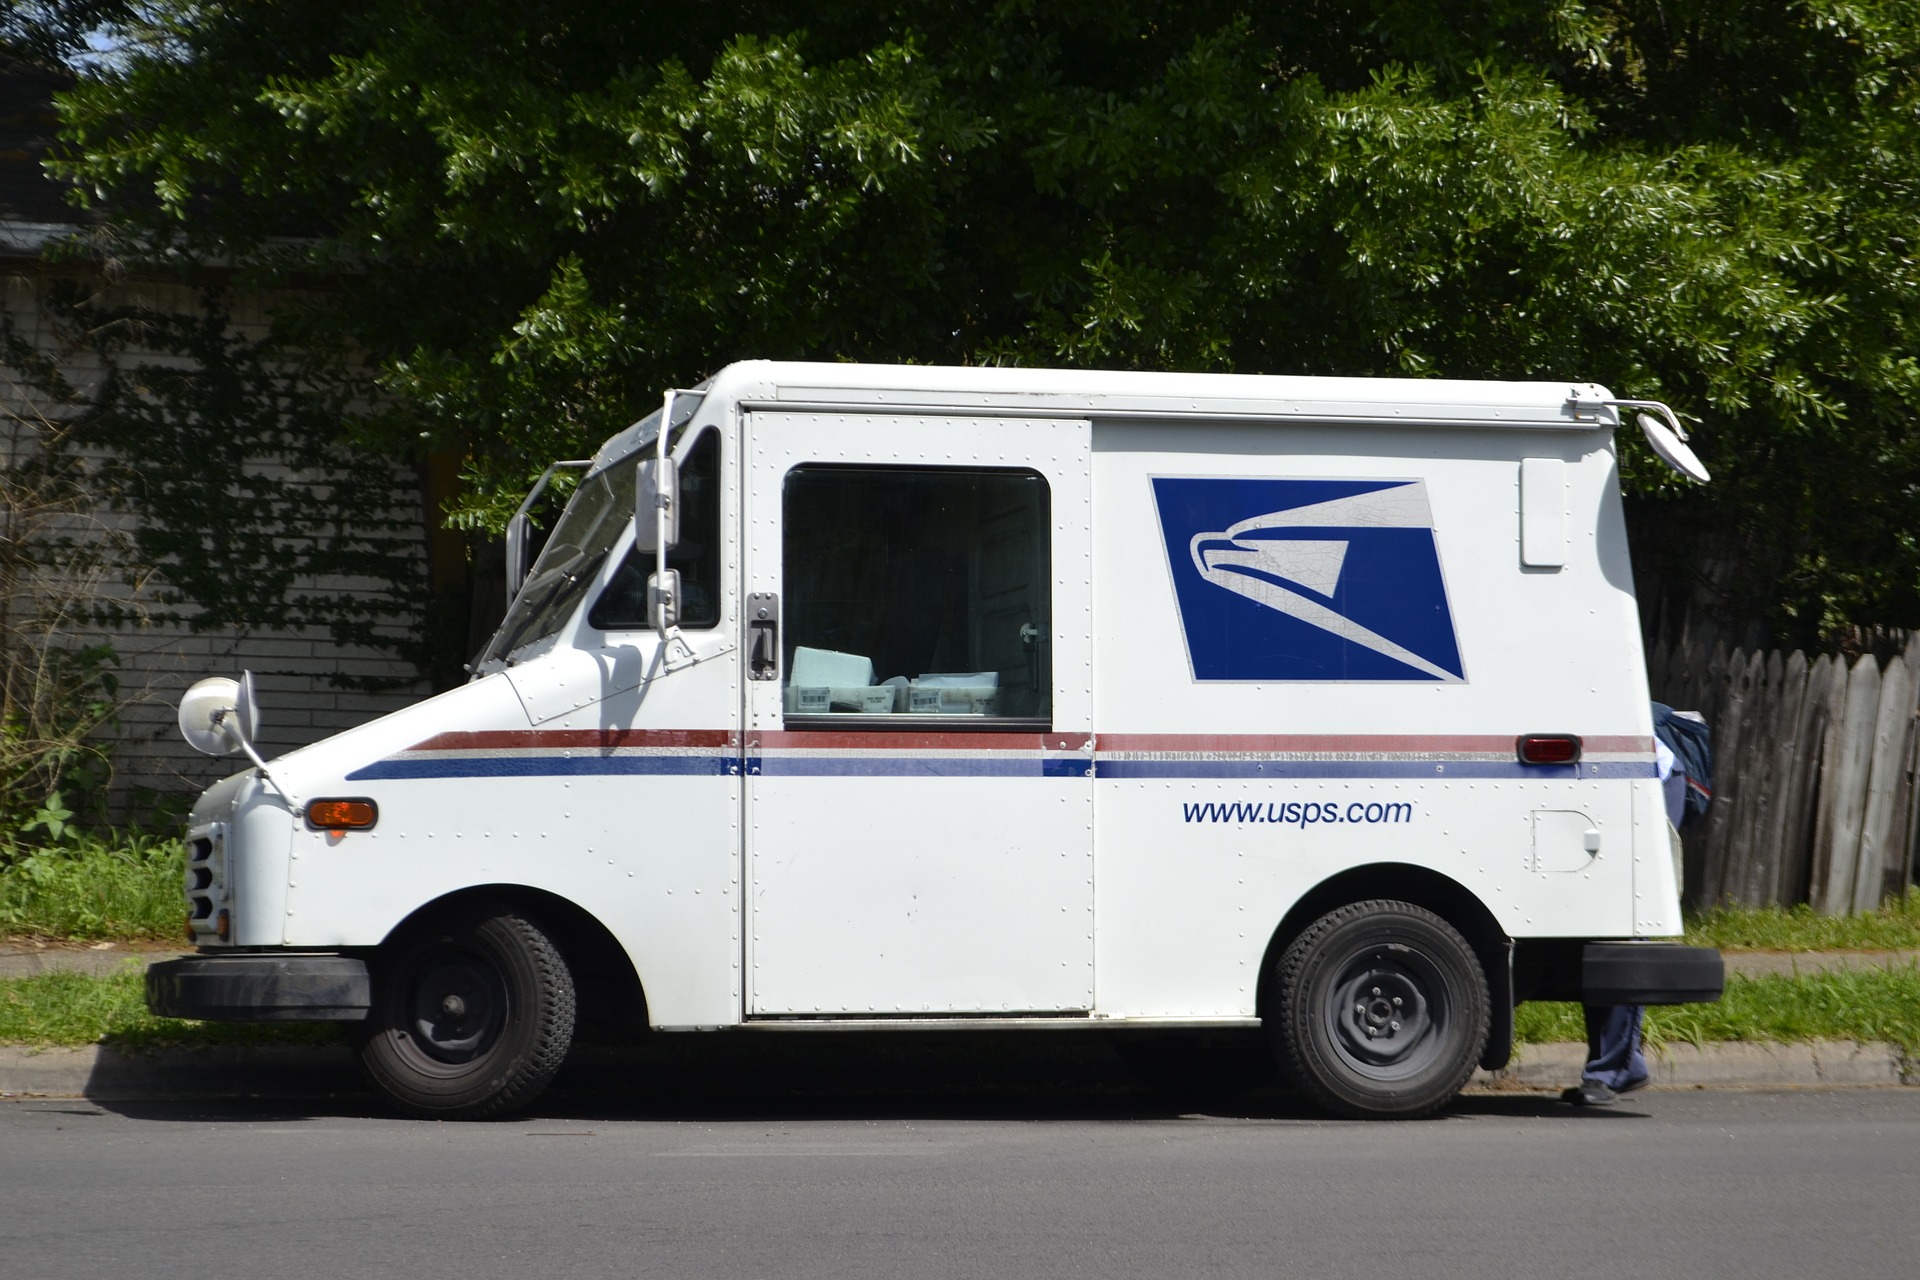 Cardenas Reintroduces Bill to Require USPS Trucks to Have Air Conditioning